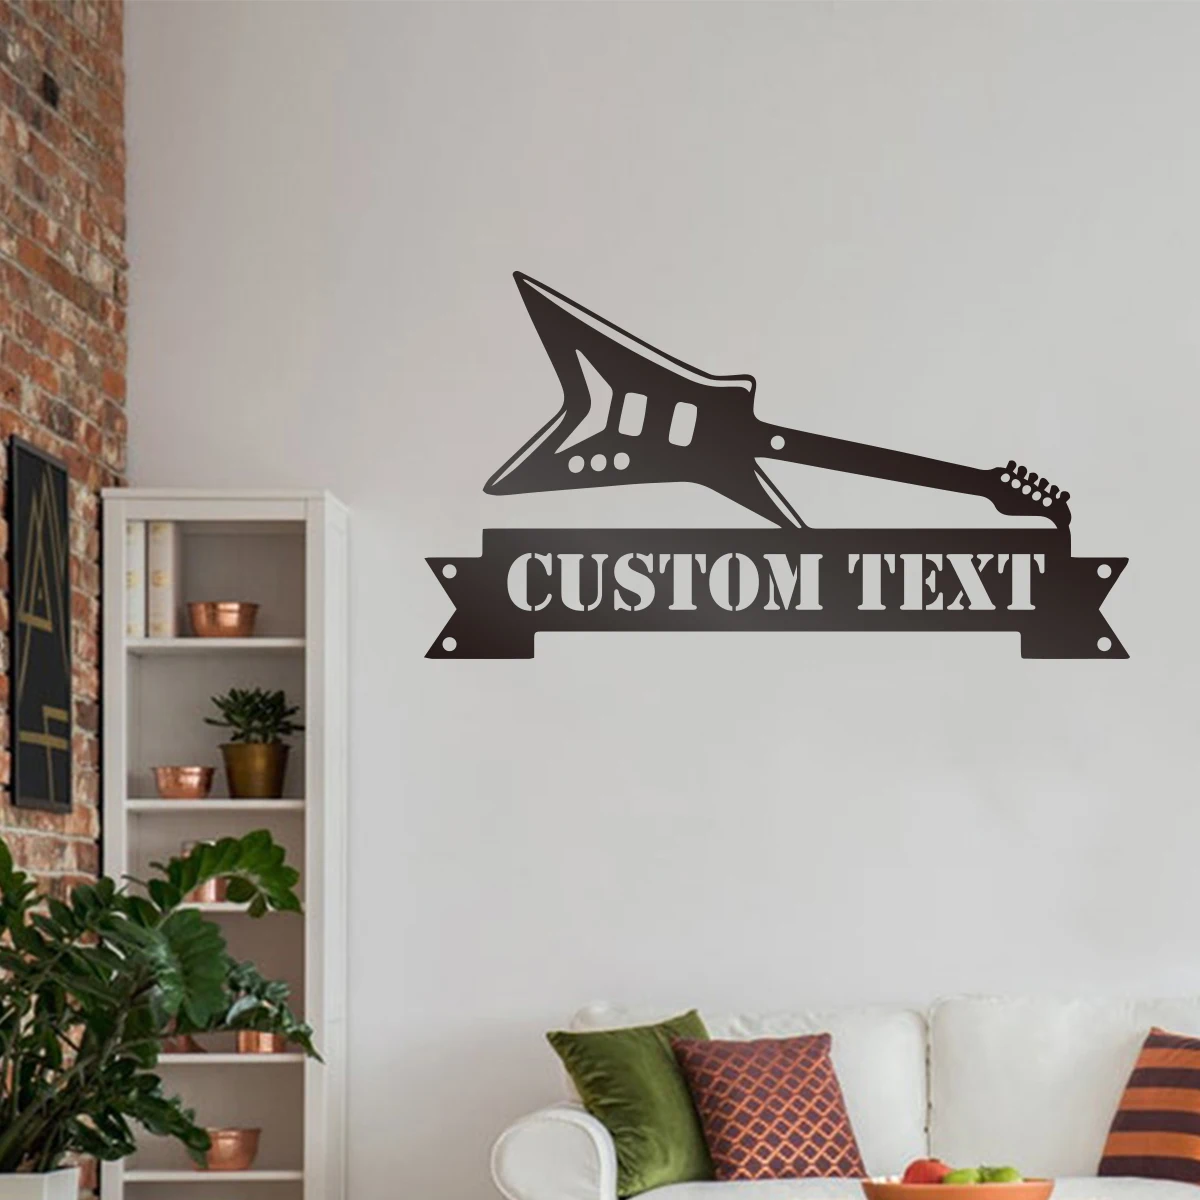 

Electric guitar Personalization custom name Metal Hanging Wall Art Plaque Black Letter Silhouette Cafe Kitchen Dining Room Pub